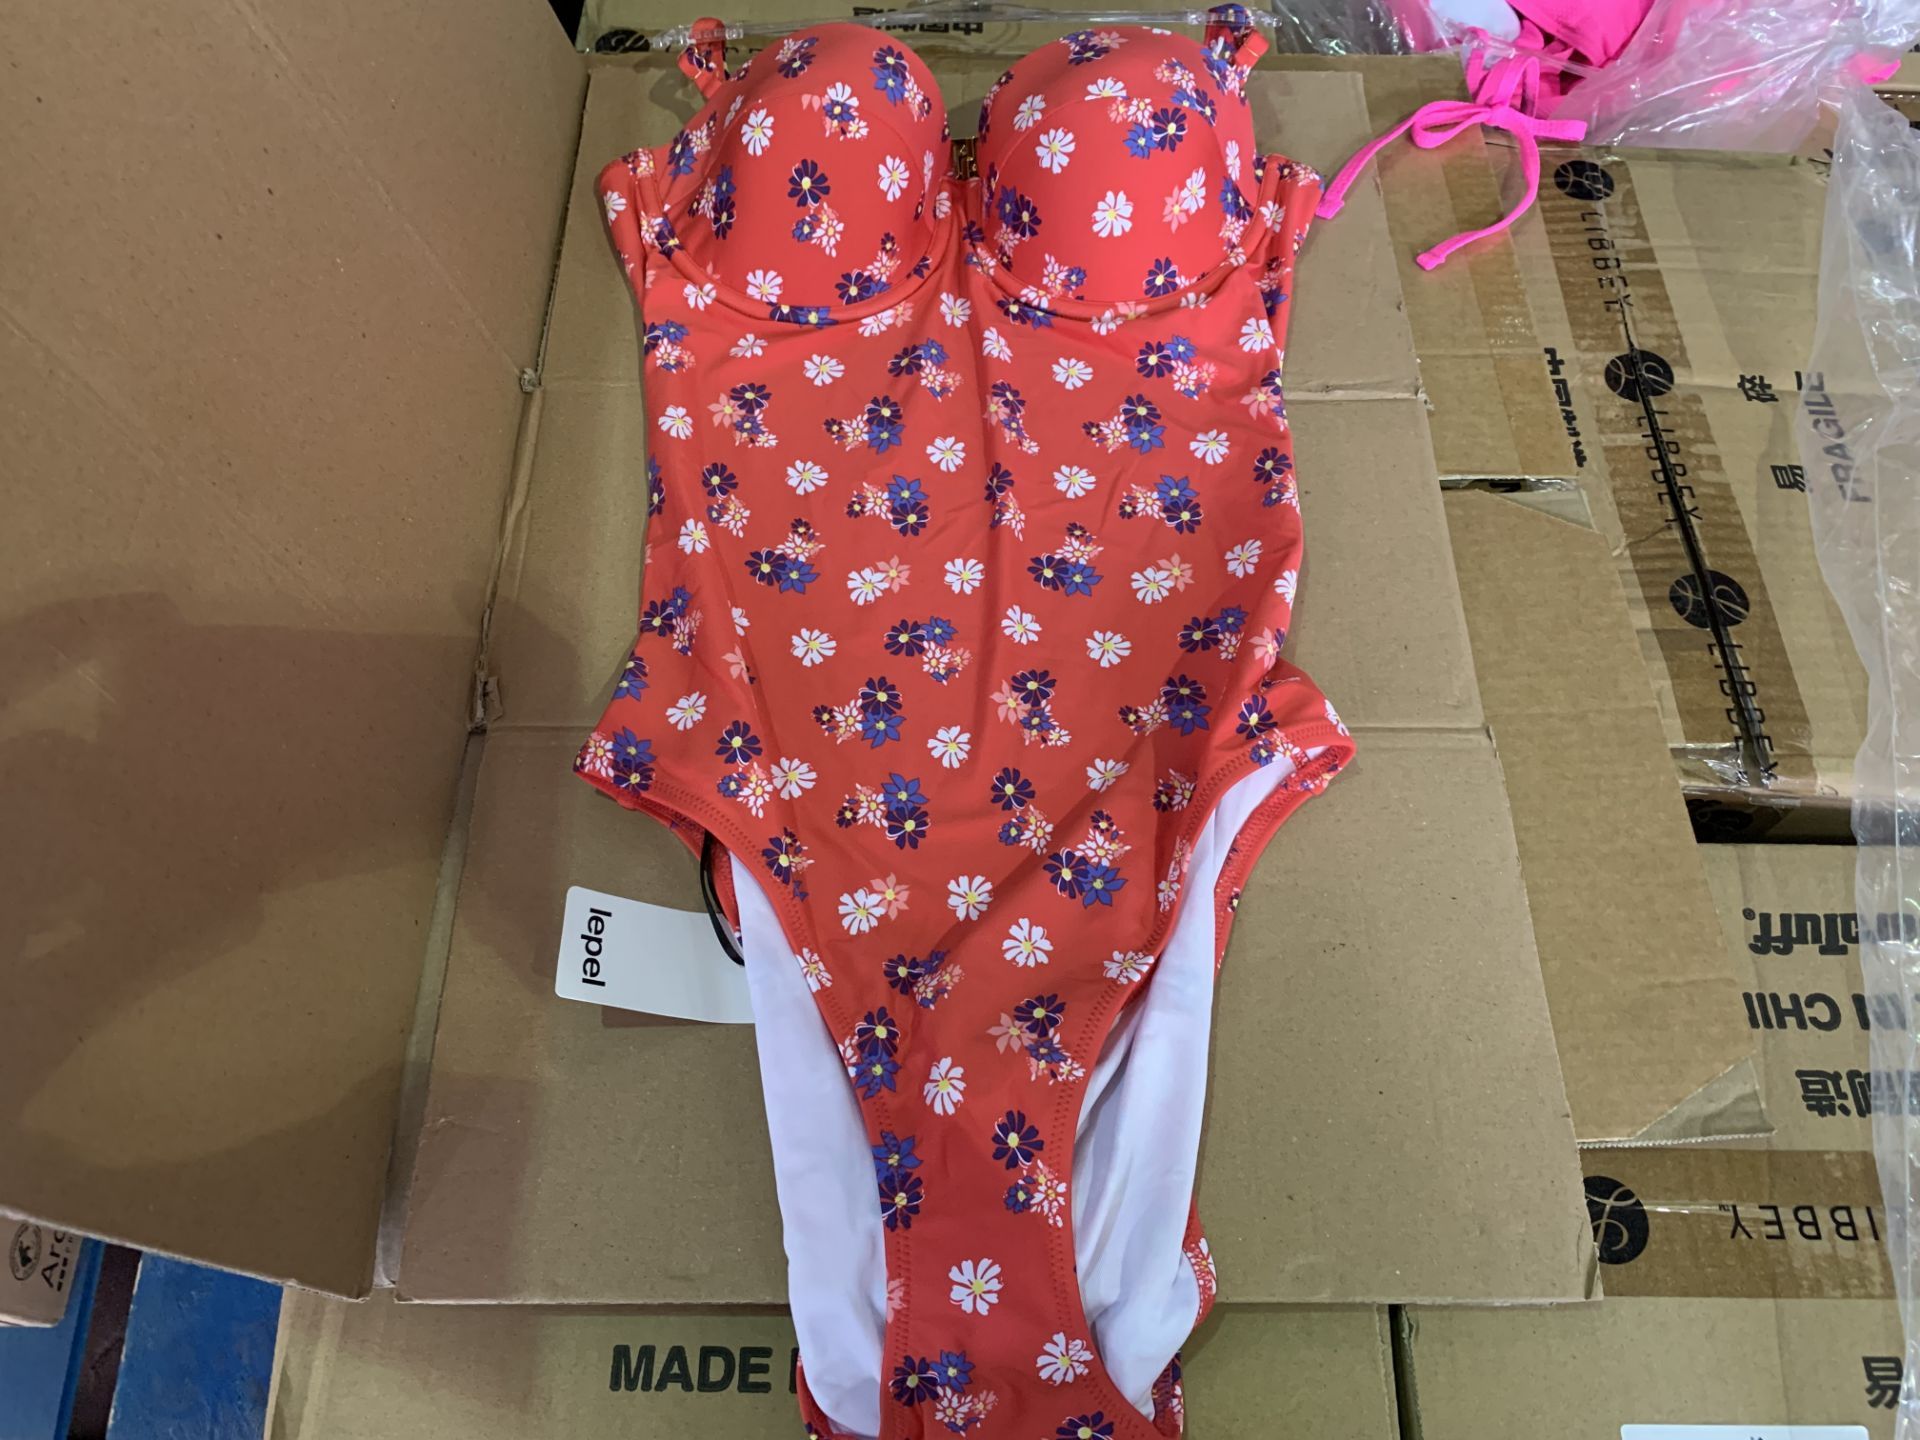 24 X BRAND NEW LEPEL RED DAISY SWIMSUITS IN VARIOUS SIZES (1269/13)